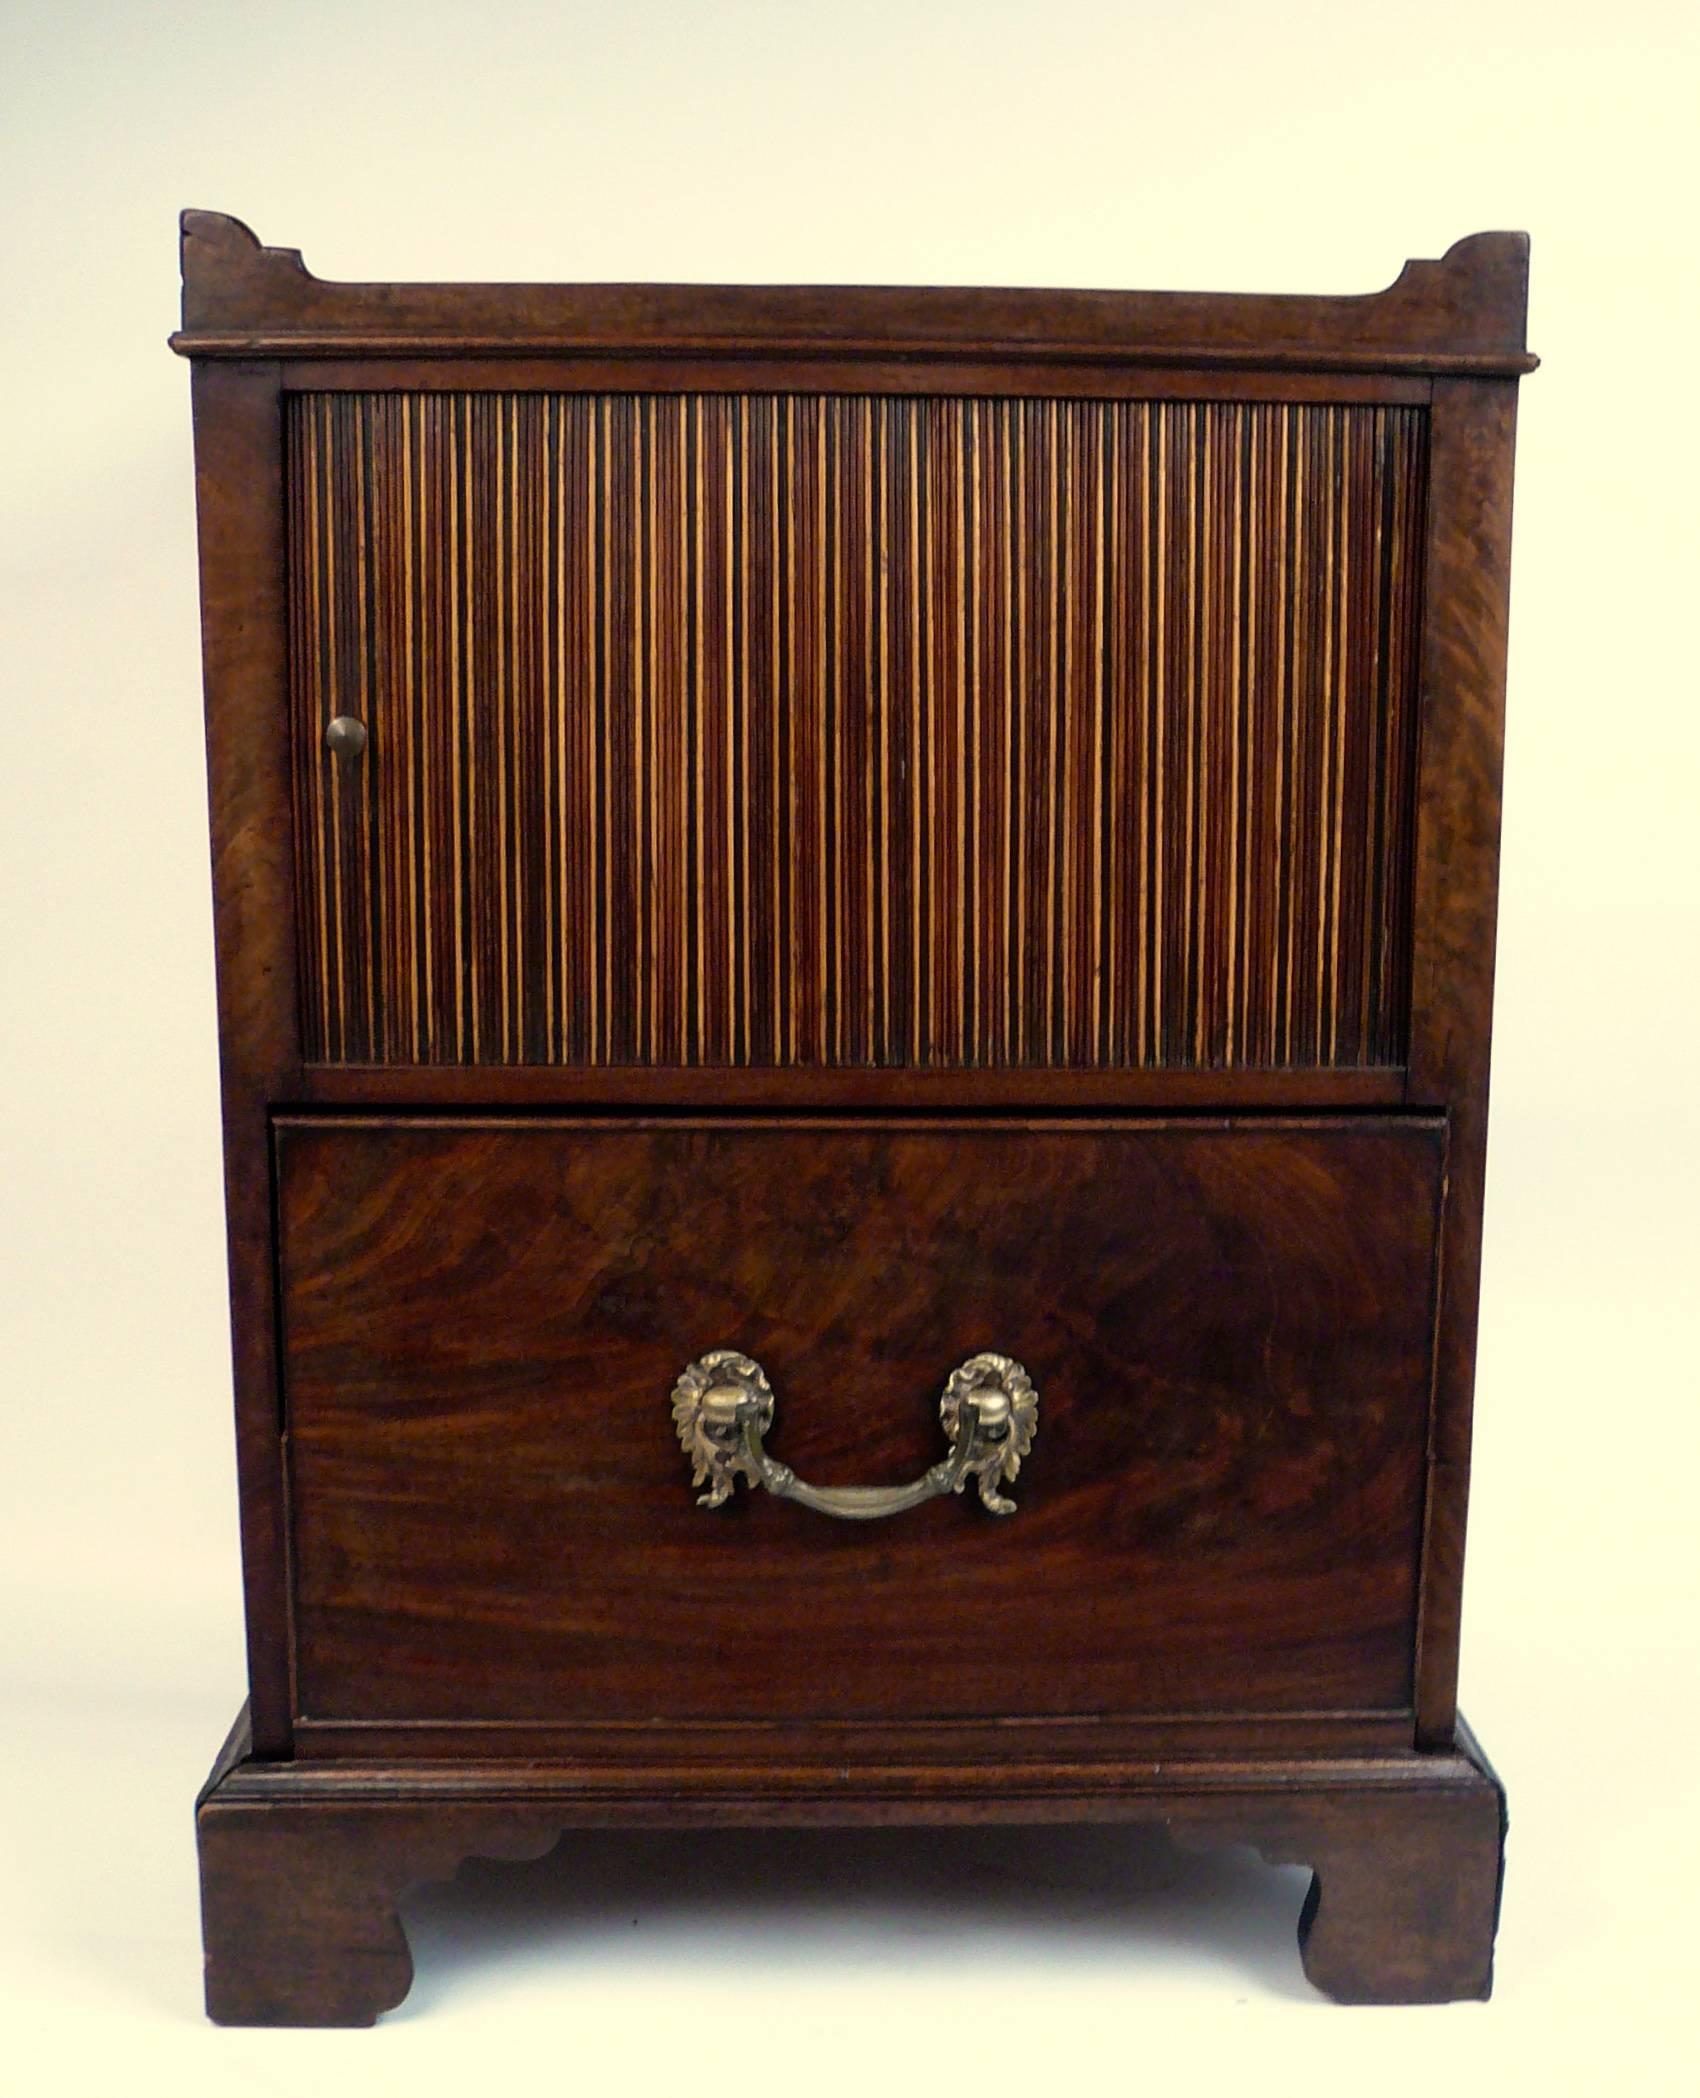 This extra fine quality bedside commode has a lovely old color and patina. It features cut out handles above a plum pudding mahogany top, and a pattered tambour door. The figured mahogany pull out bottom drawer retains its original cast brass